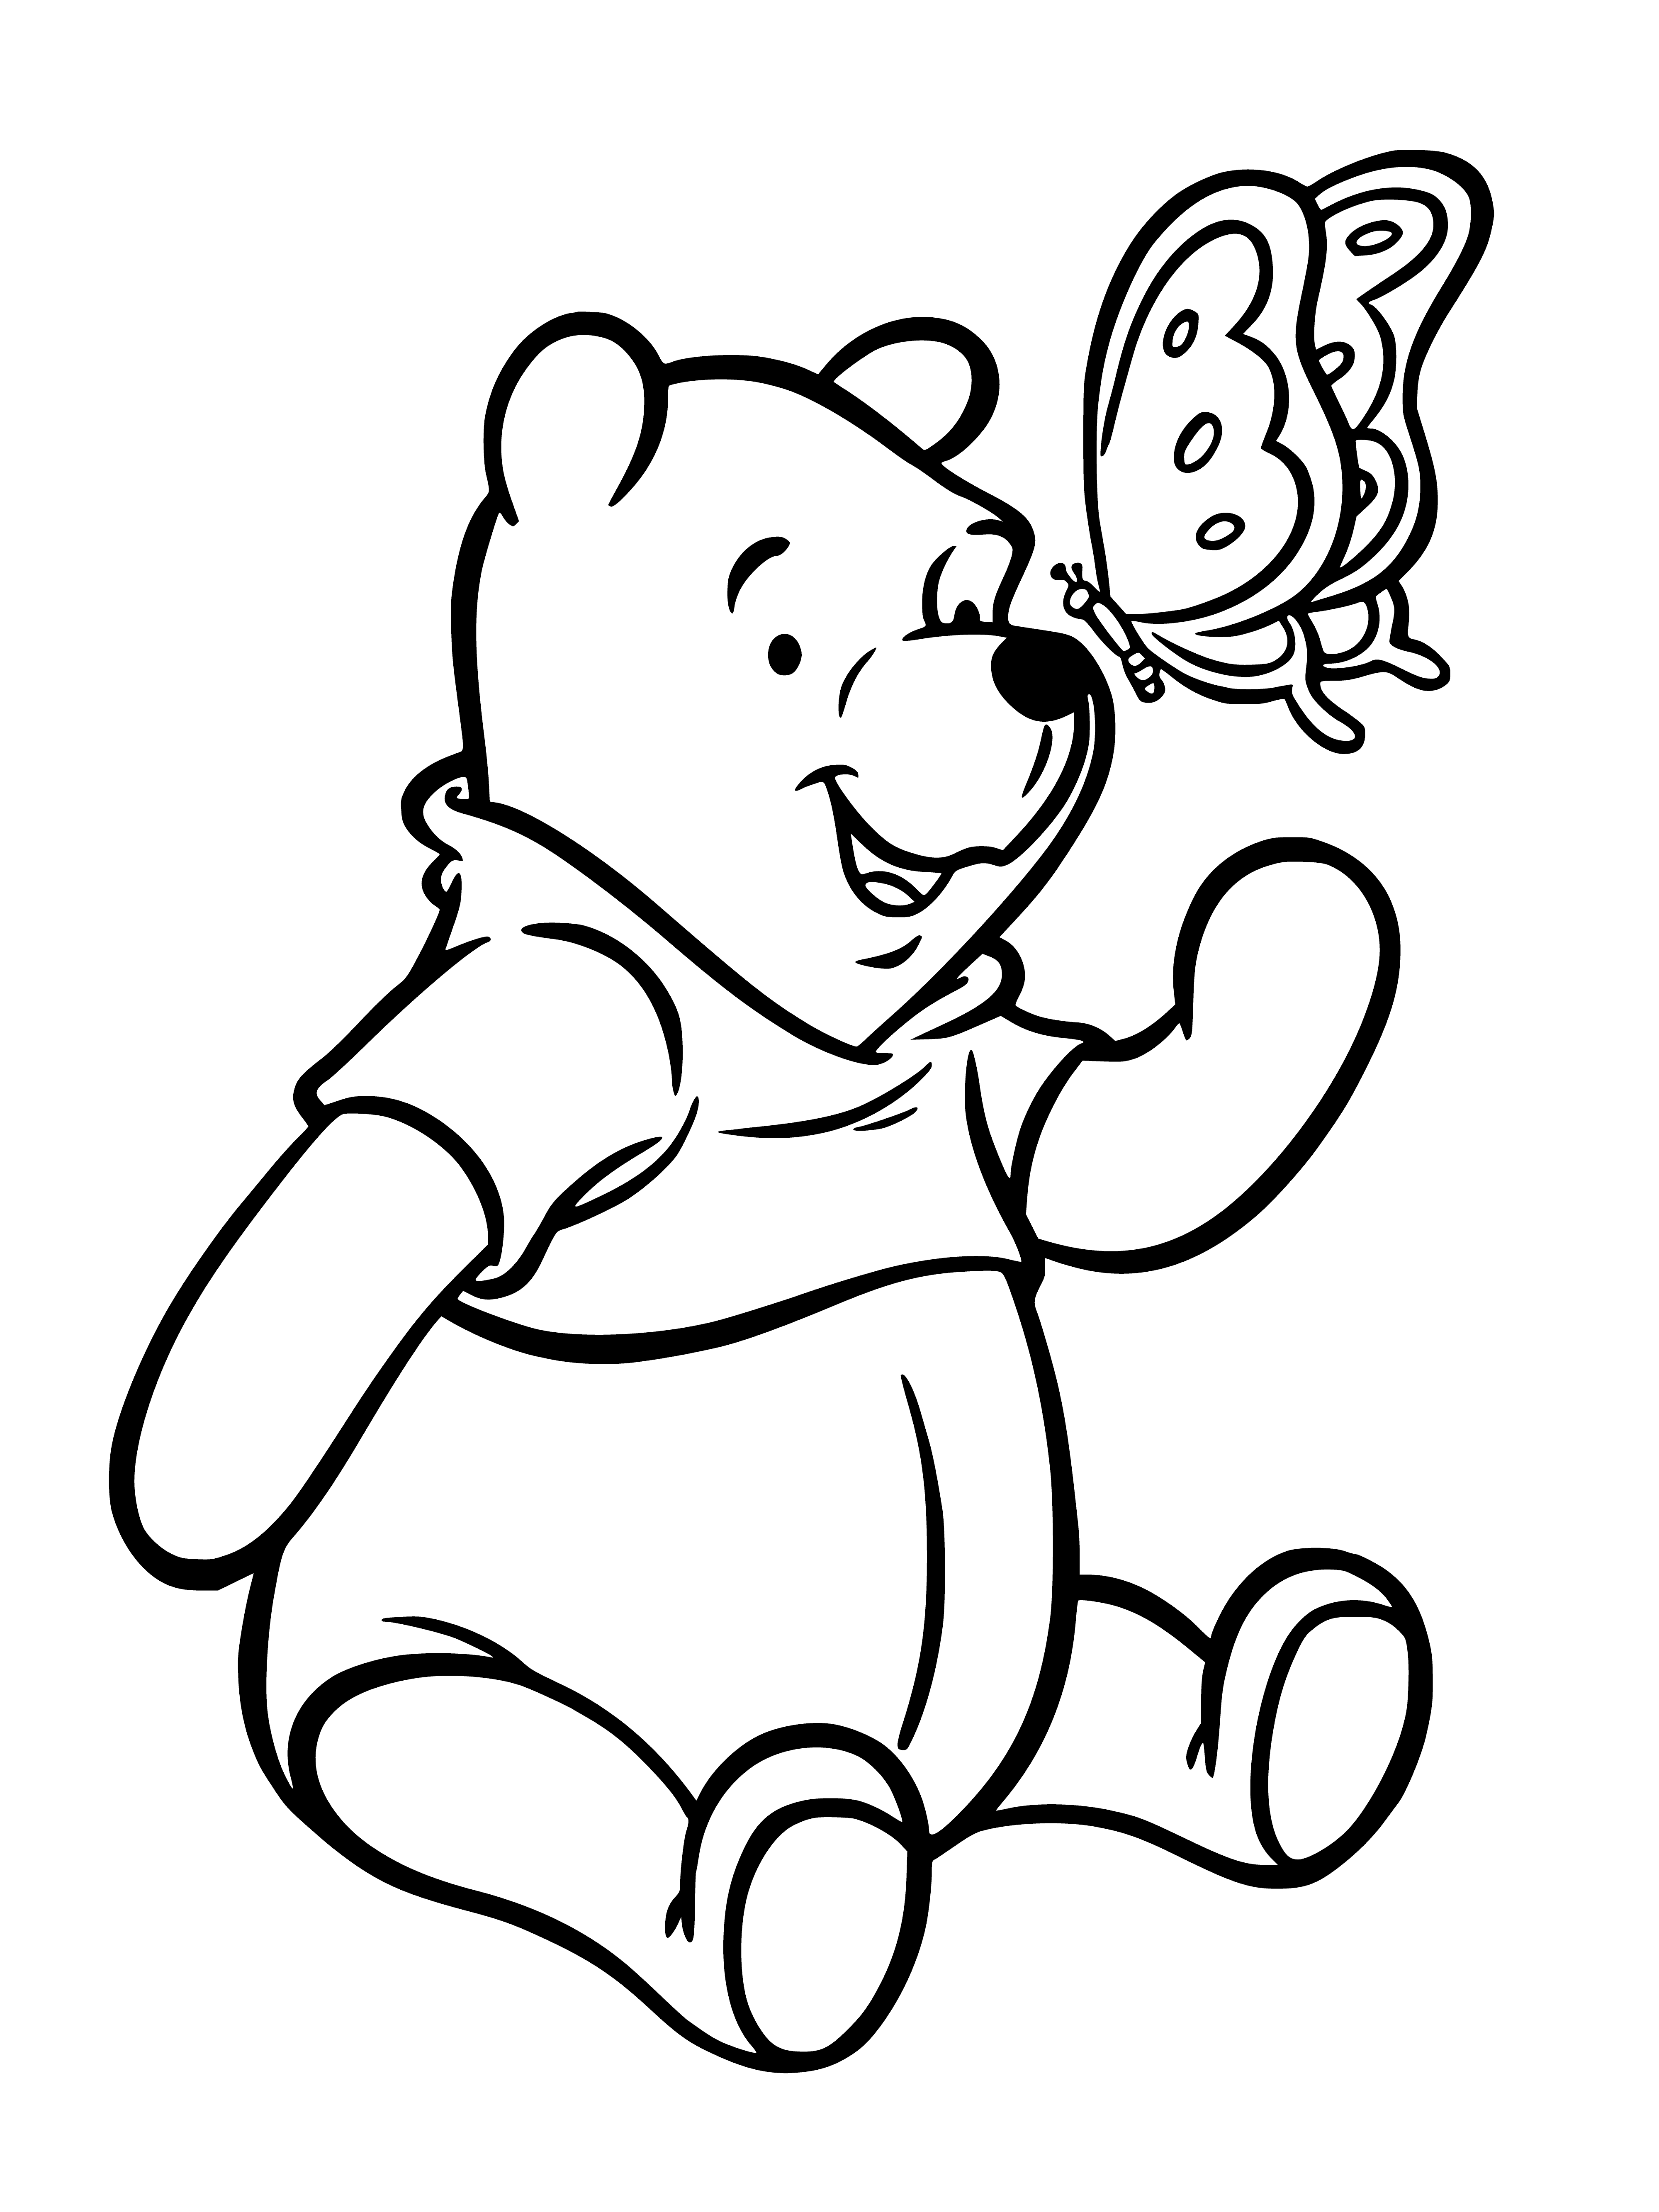 Winnie and the butterfly coloring page